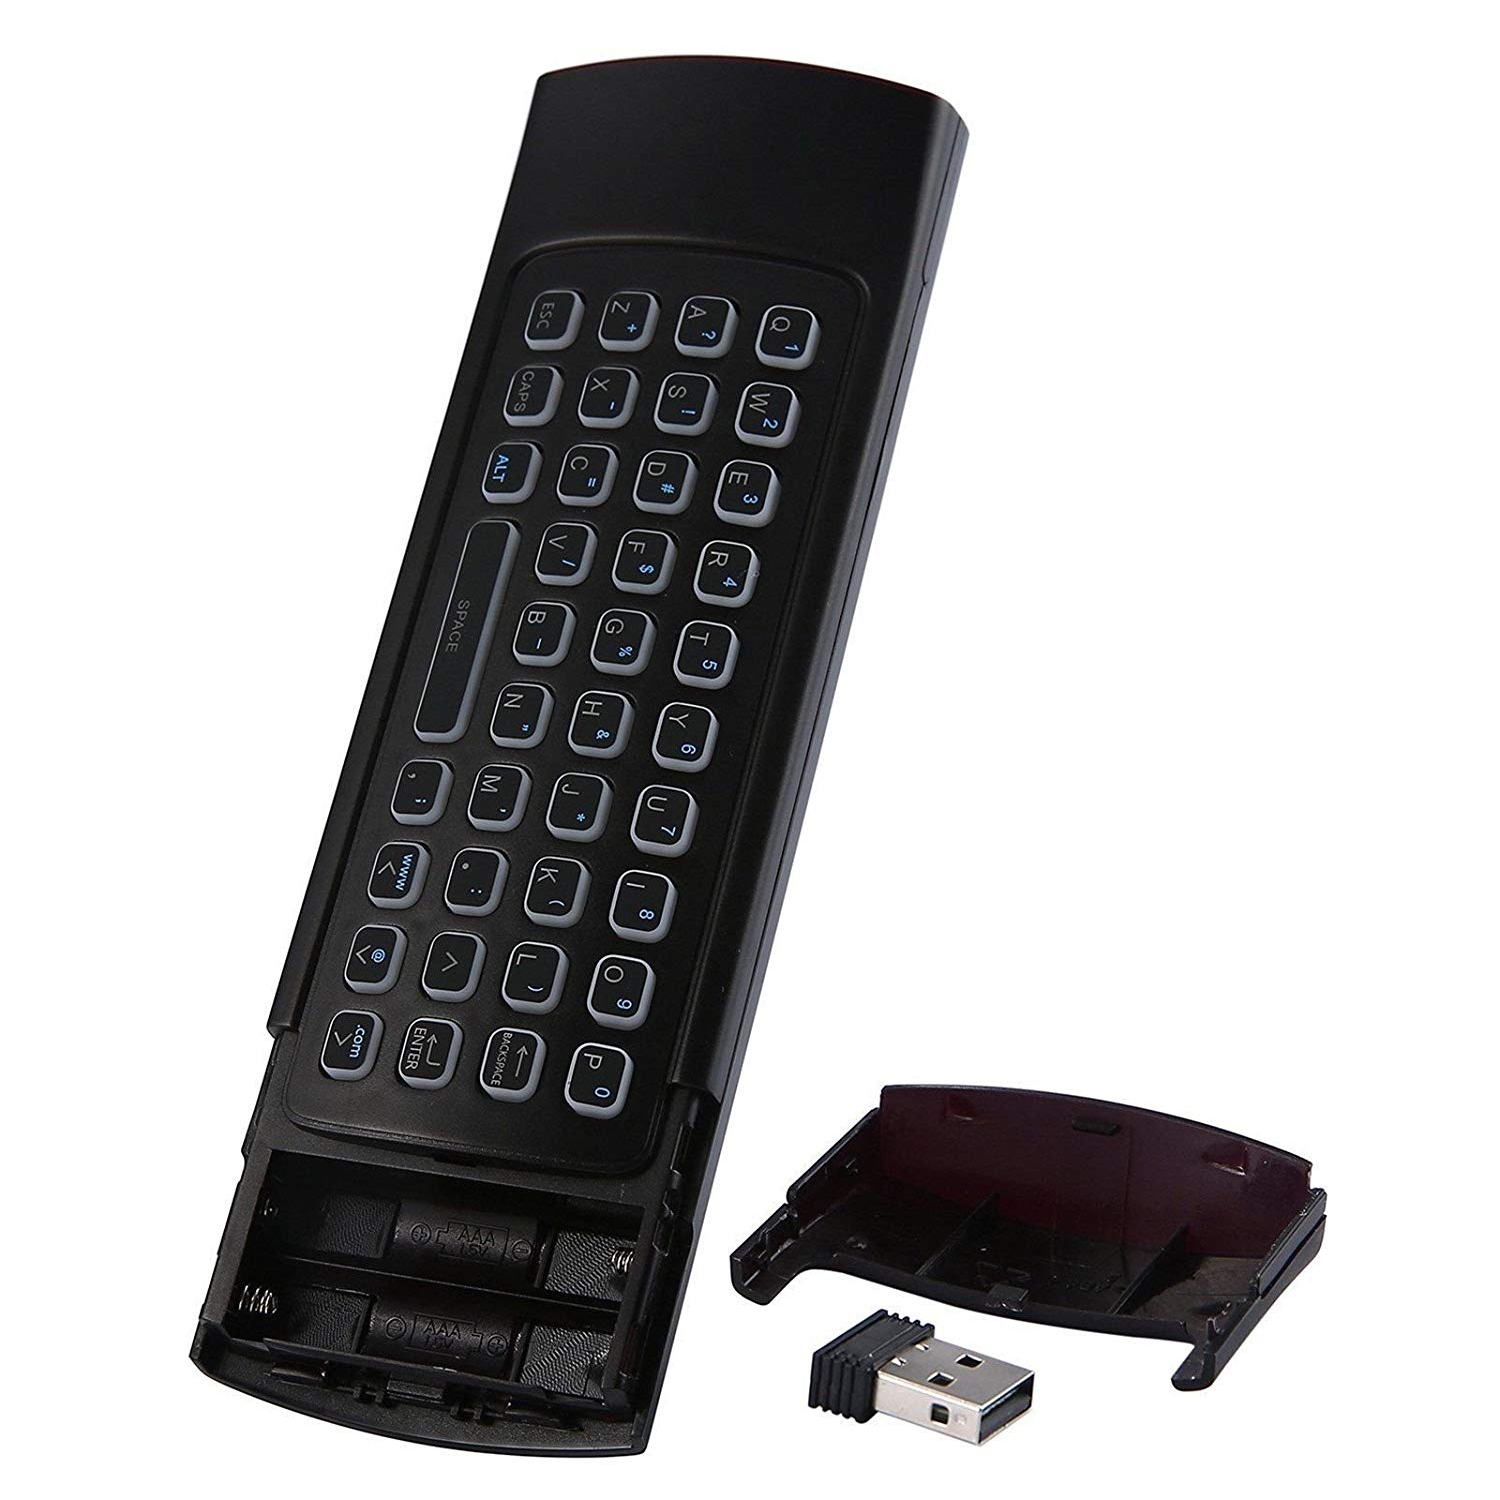 MX3 2.4G Wireless Remote Control Keyboard Air Mouse For PC TV Box PCTV HTPC 